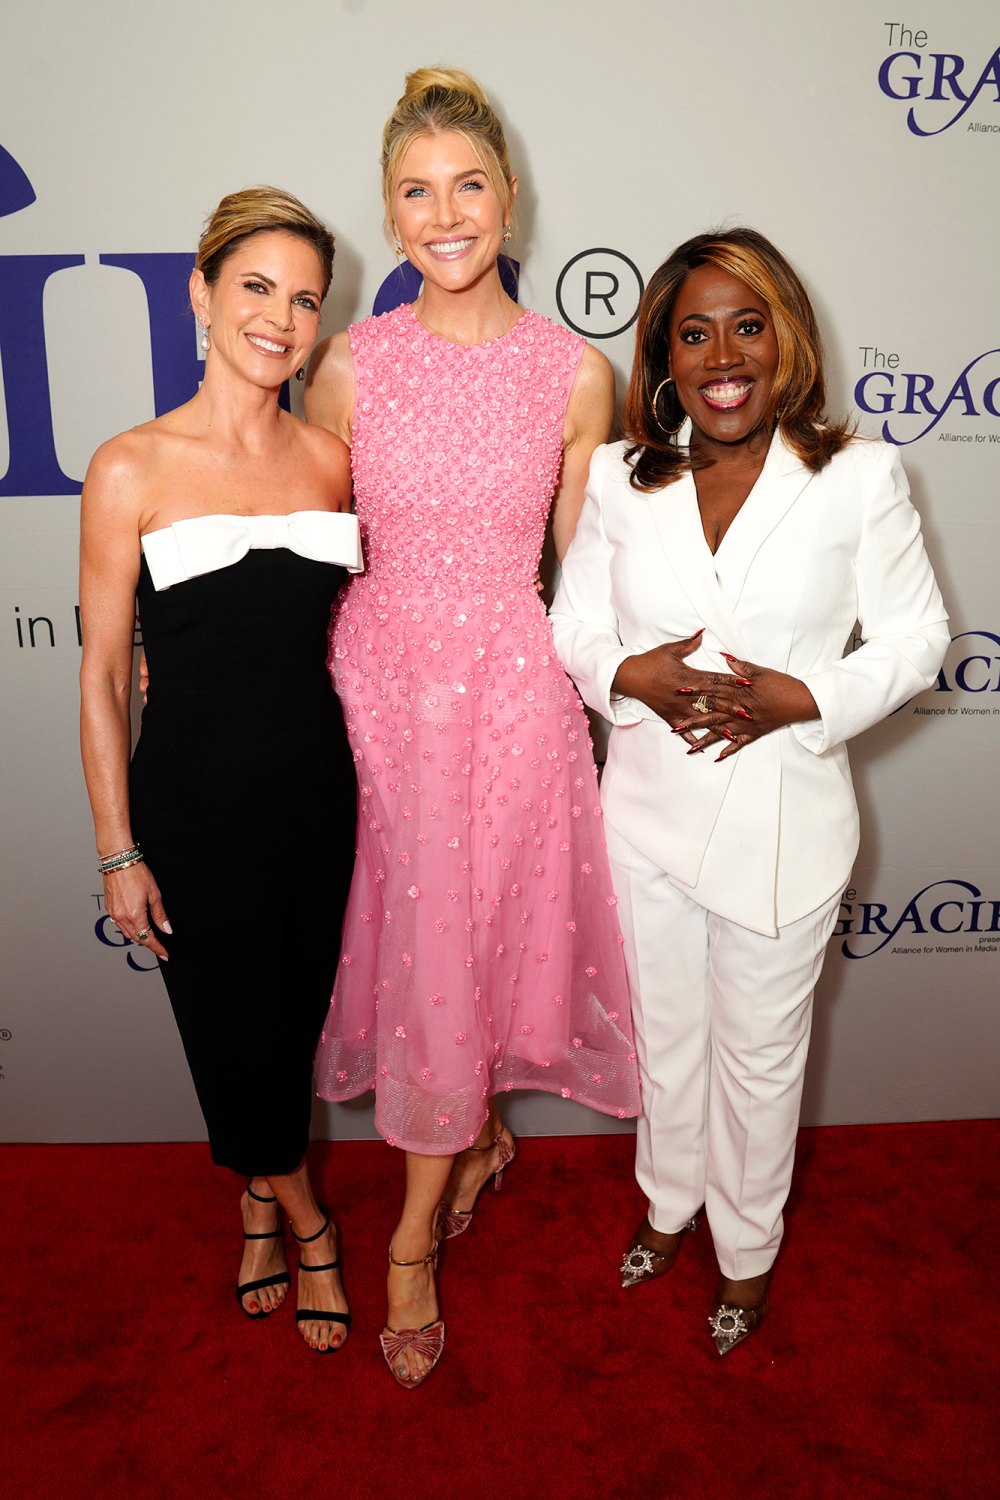 The Talk's Amanda Kloots, Sheryl Underwood and Natalie Morales Want to Give the Show a 'Great Ending'